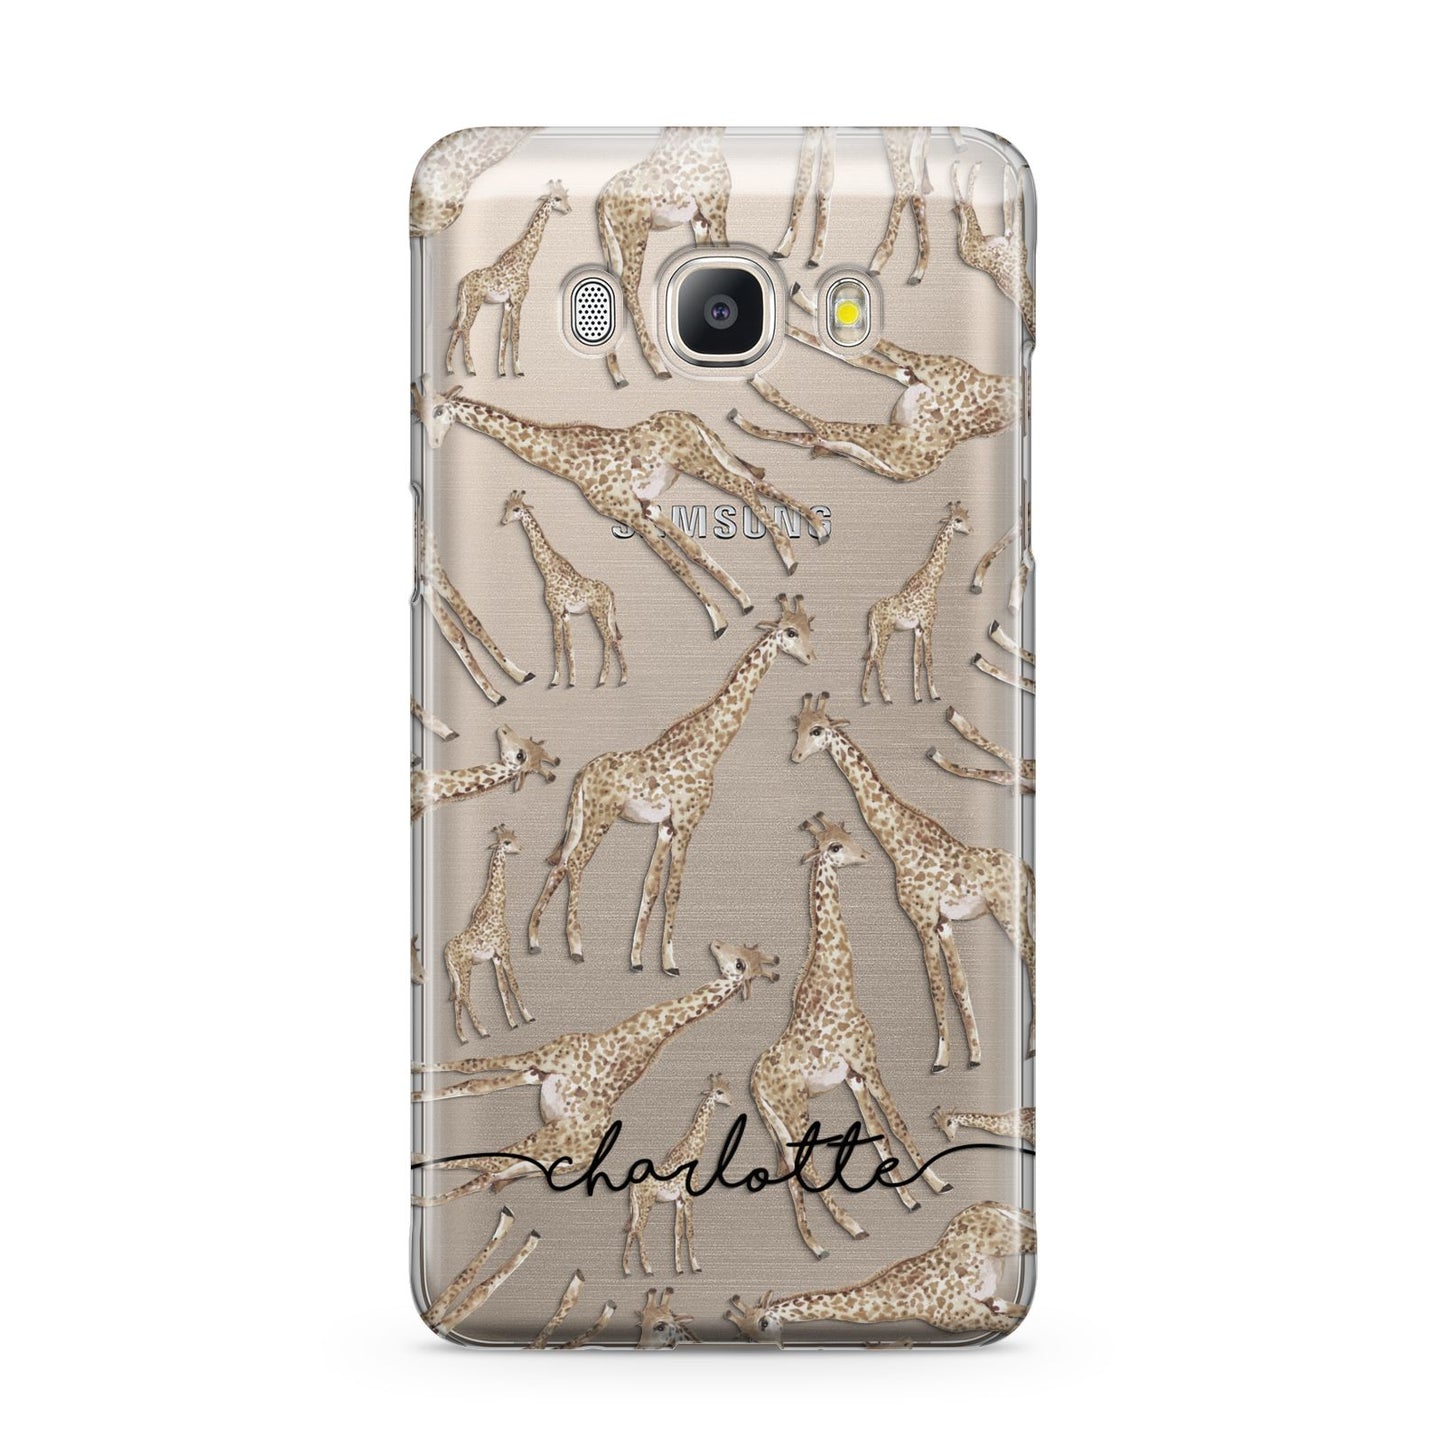 Personalised Giraffes with Name Samsung Galaxy J5 2016 Case